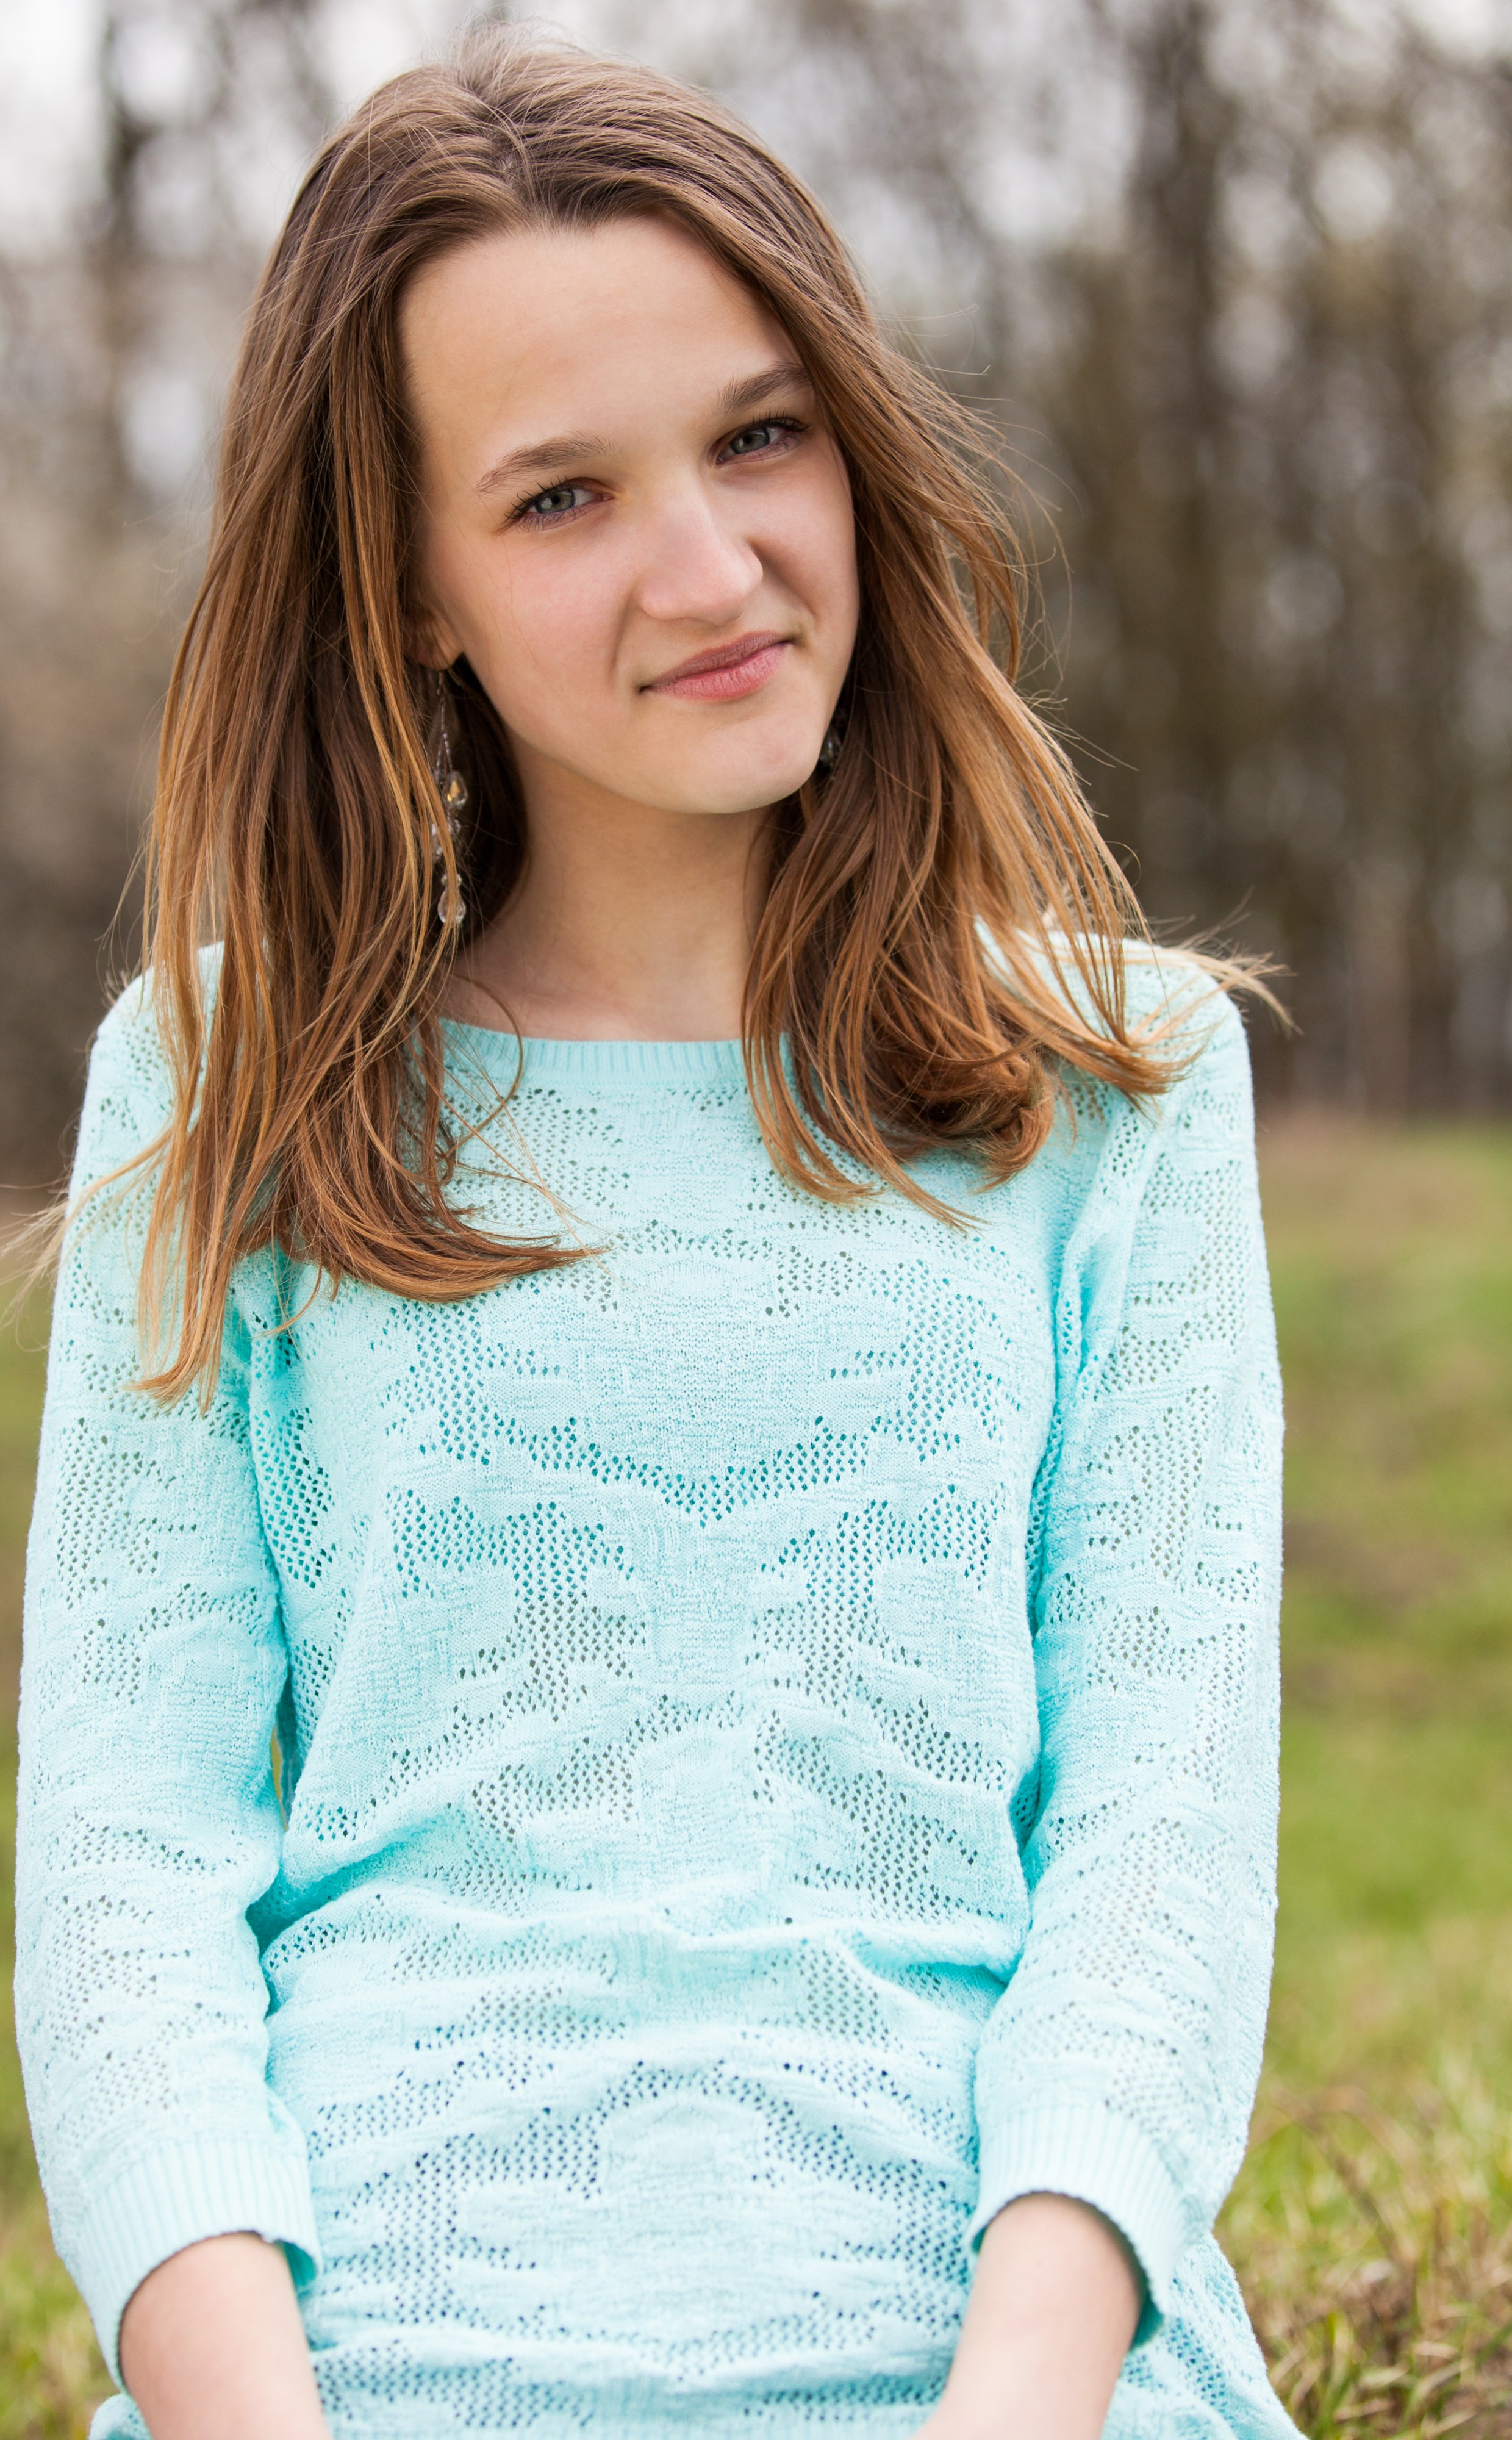 a 13-year-old Catholic girl photographed in April 2015, picture 2